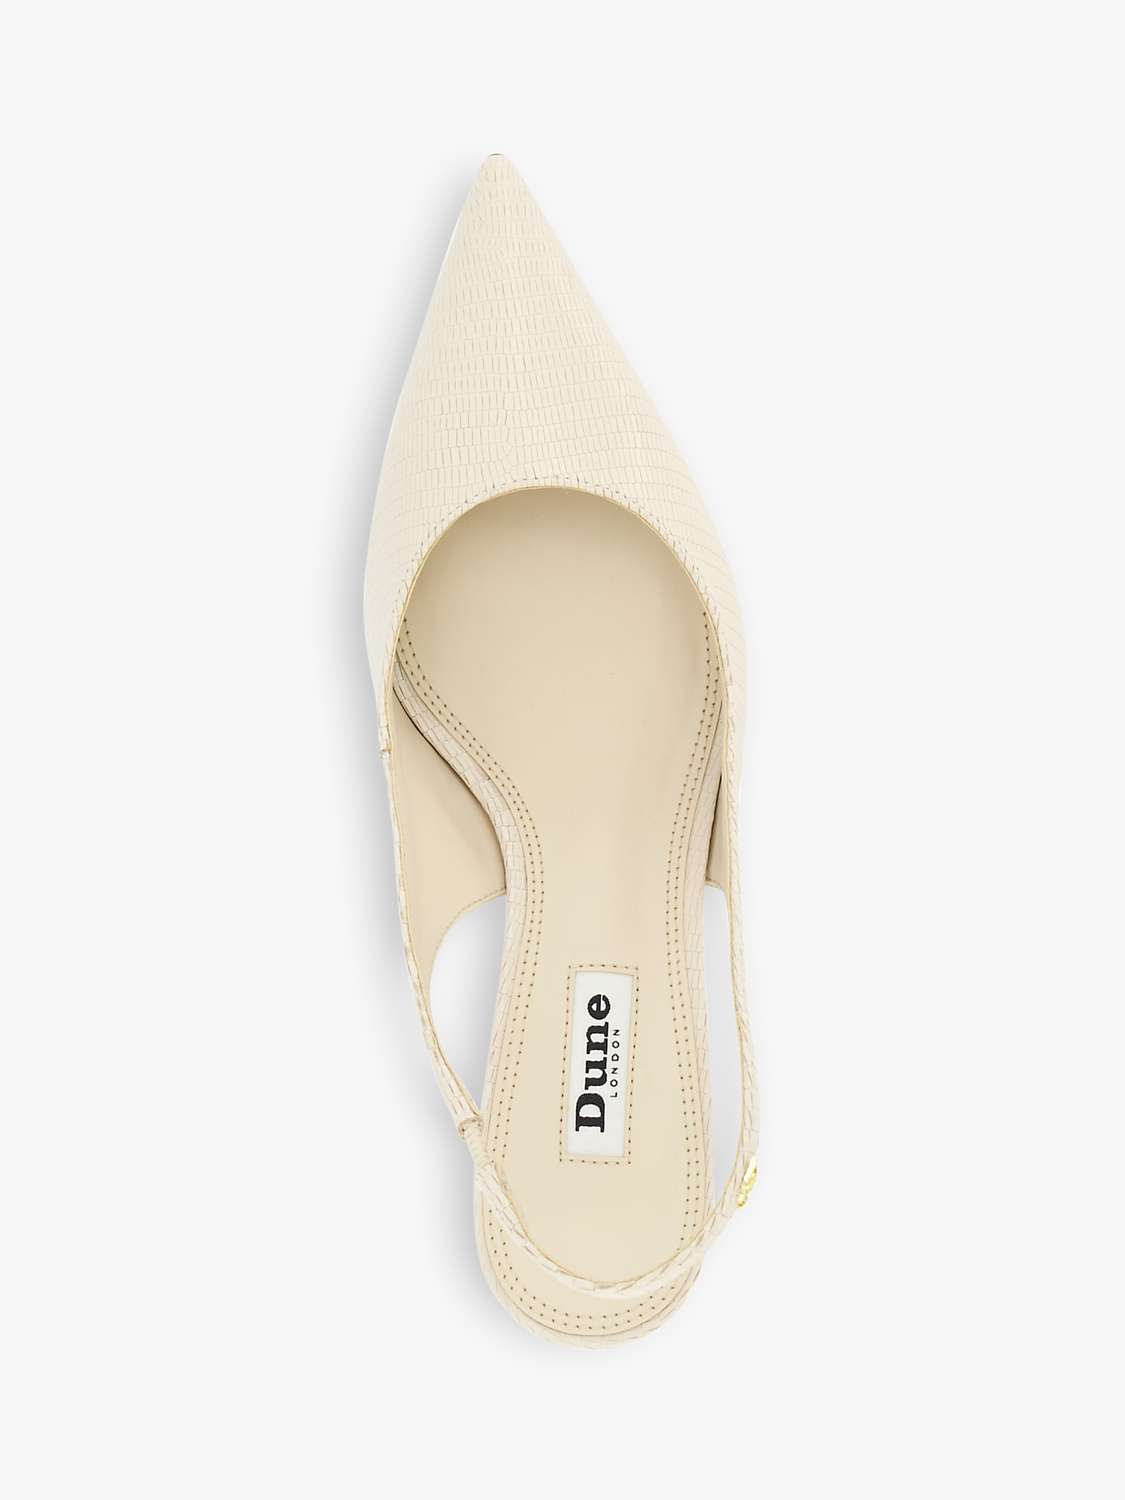 Buy Dune Capitol Leather Stiletto Heel Slingback Court Shoes Online at johnlewis.com